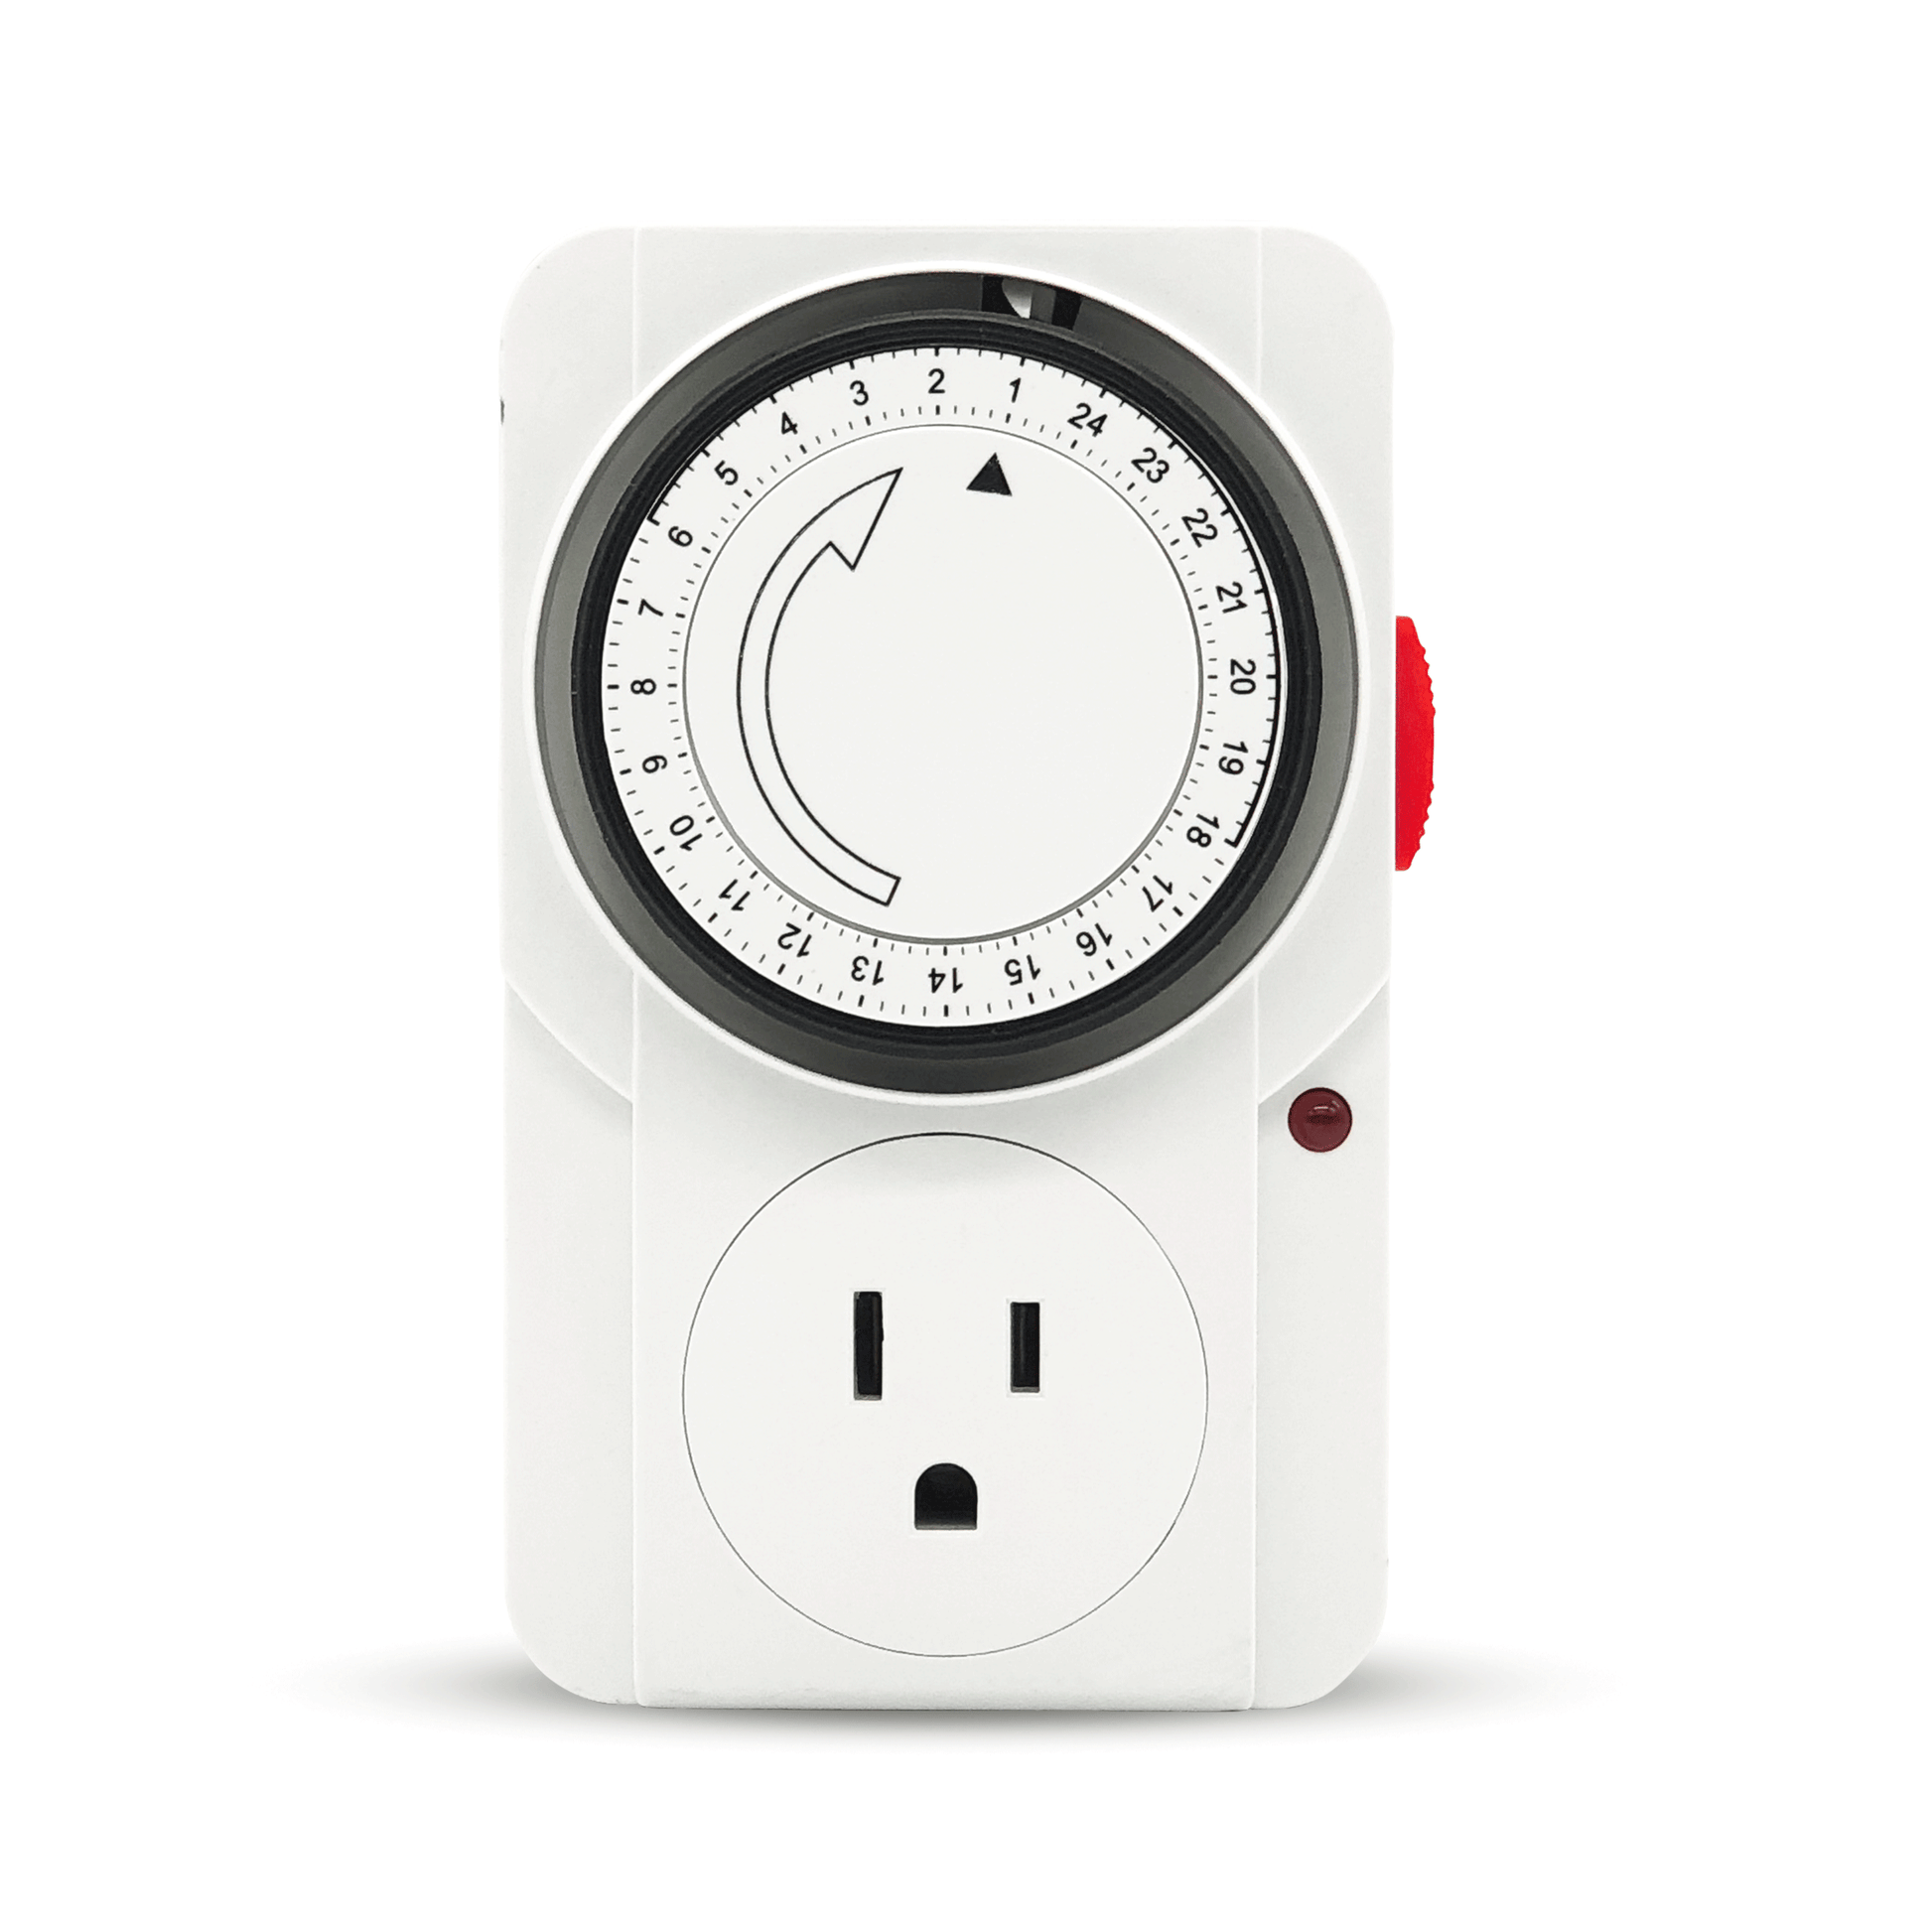 Jiffy Hydro Single Grounded Outlet Timer for Grow Lights Pumps & More from Ferry-Morse Seeds